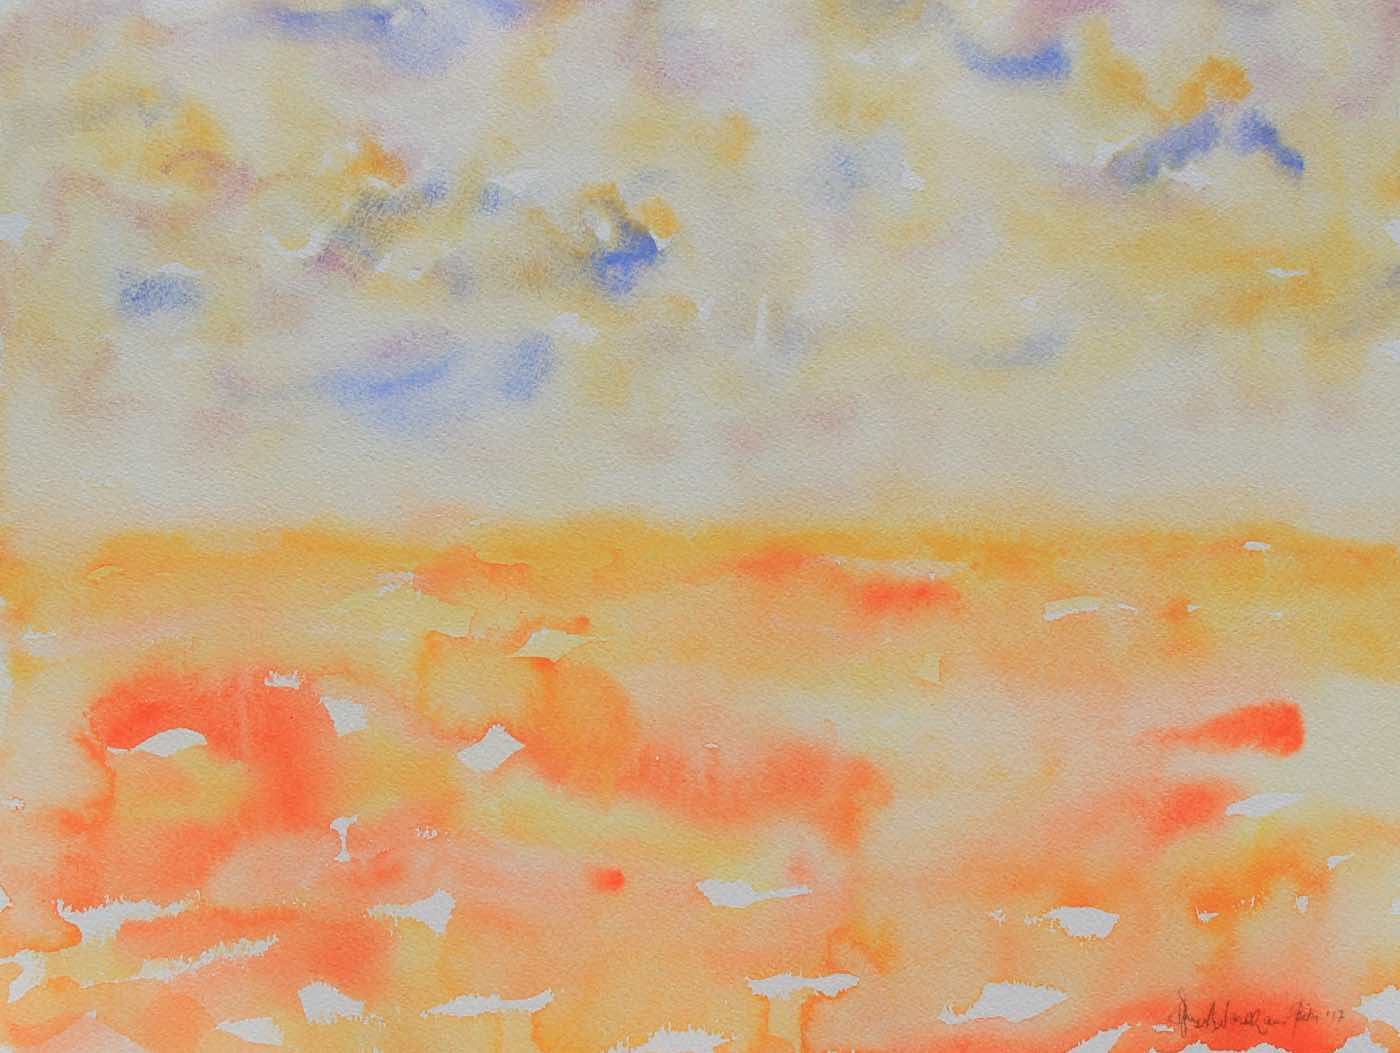 Blue, yellow, and orange watercolor of a horizon